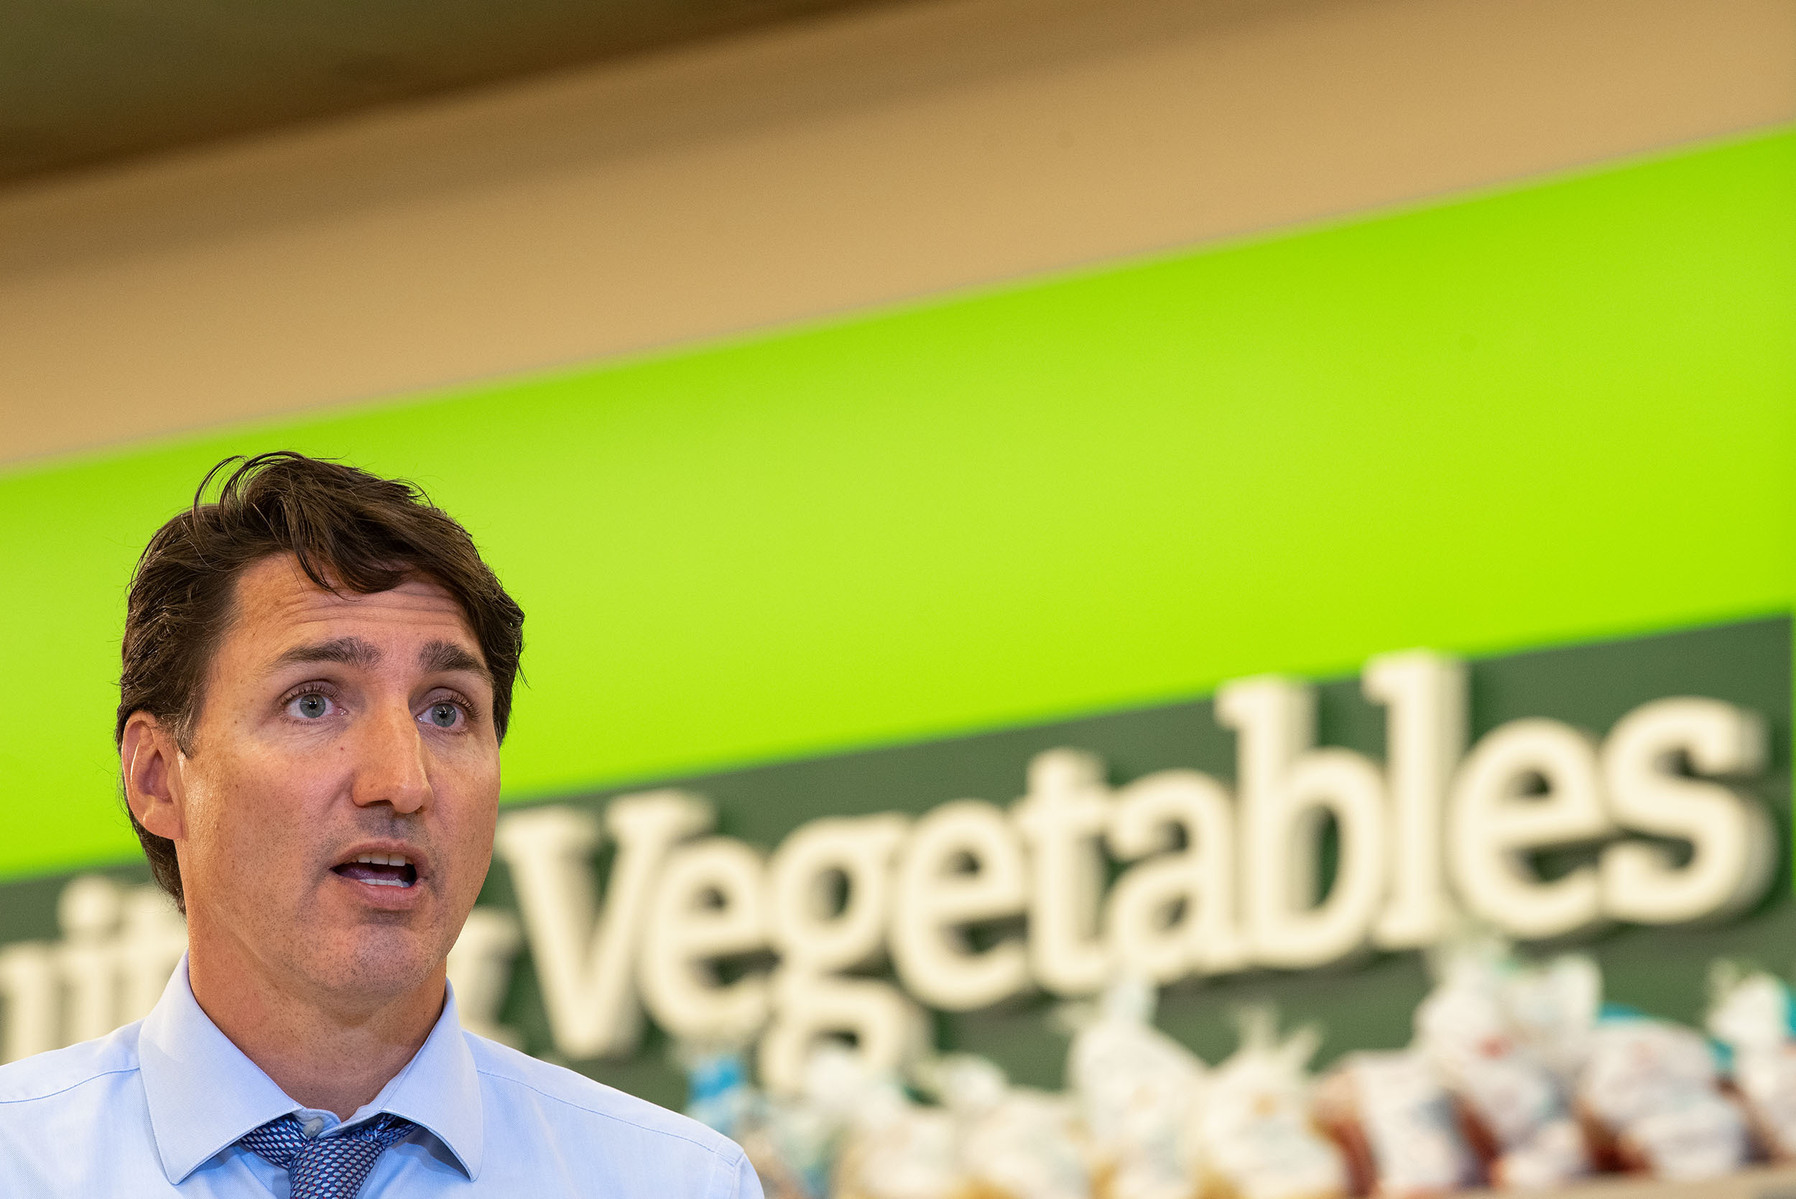 Liberal Leader Justin Trudeau at the Cavalier Drive FoodFare location in Winnipeg on Aug. 20, 2021 during a campaign stop.